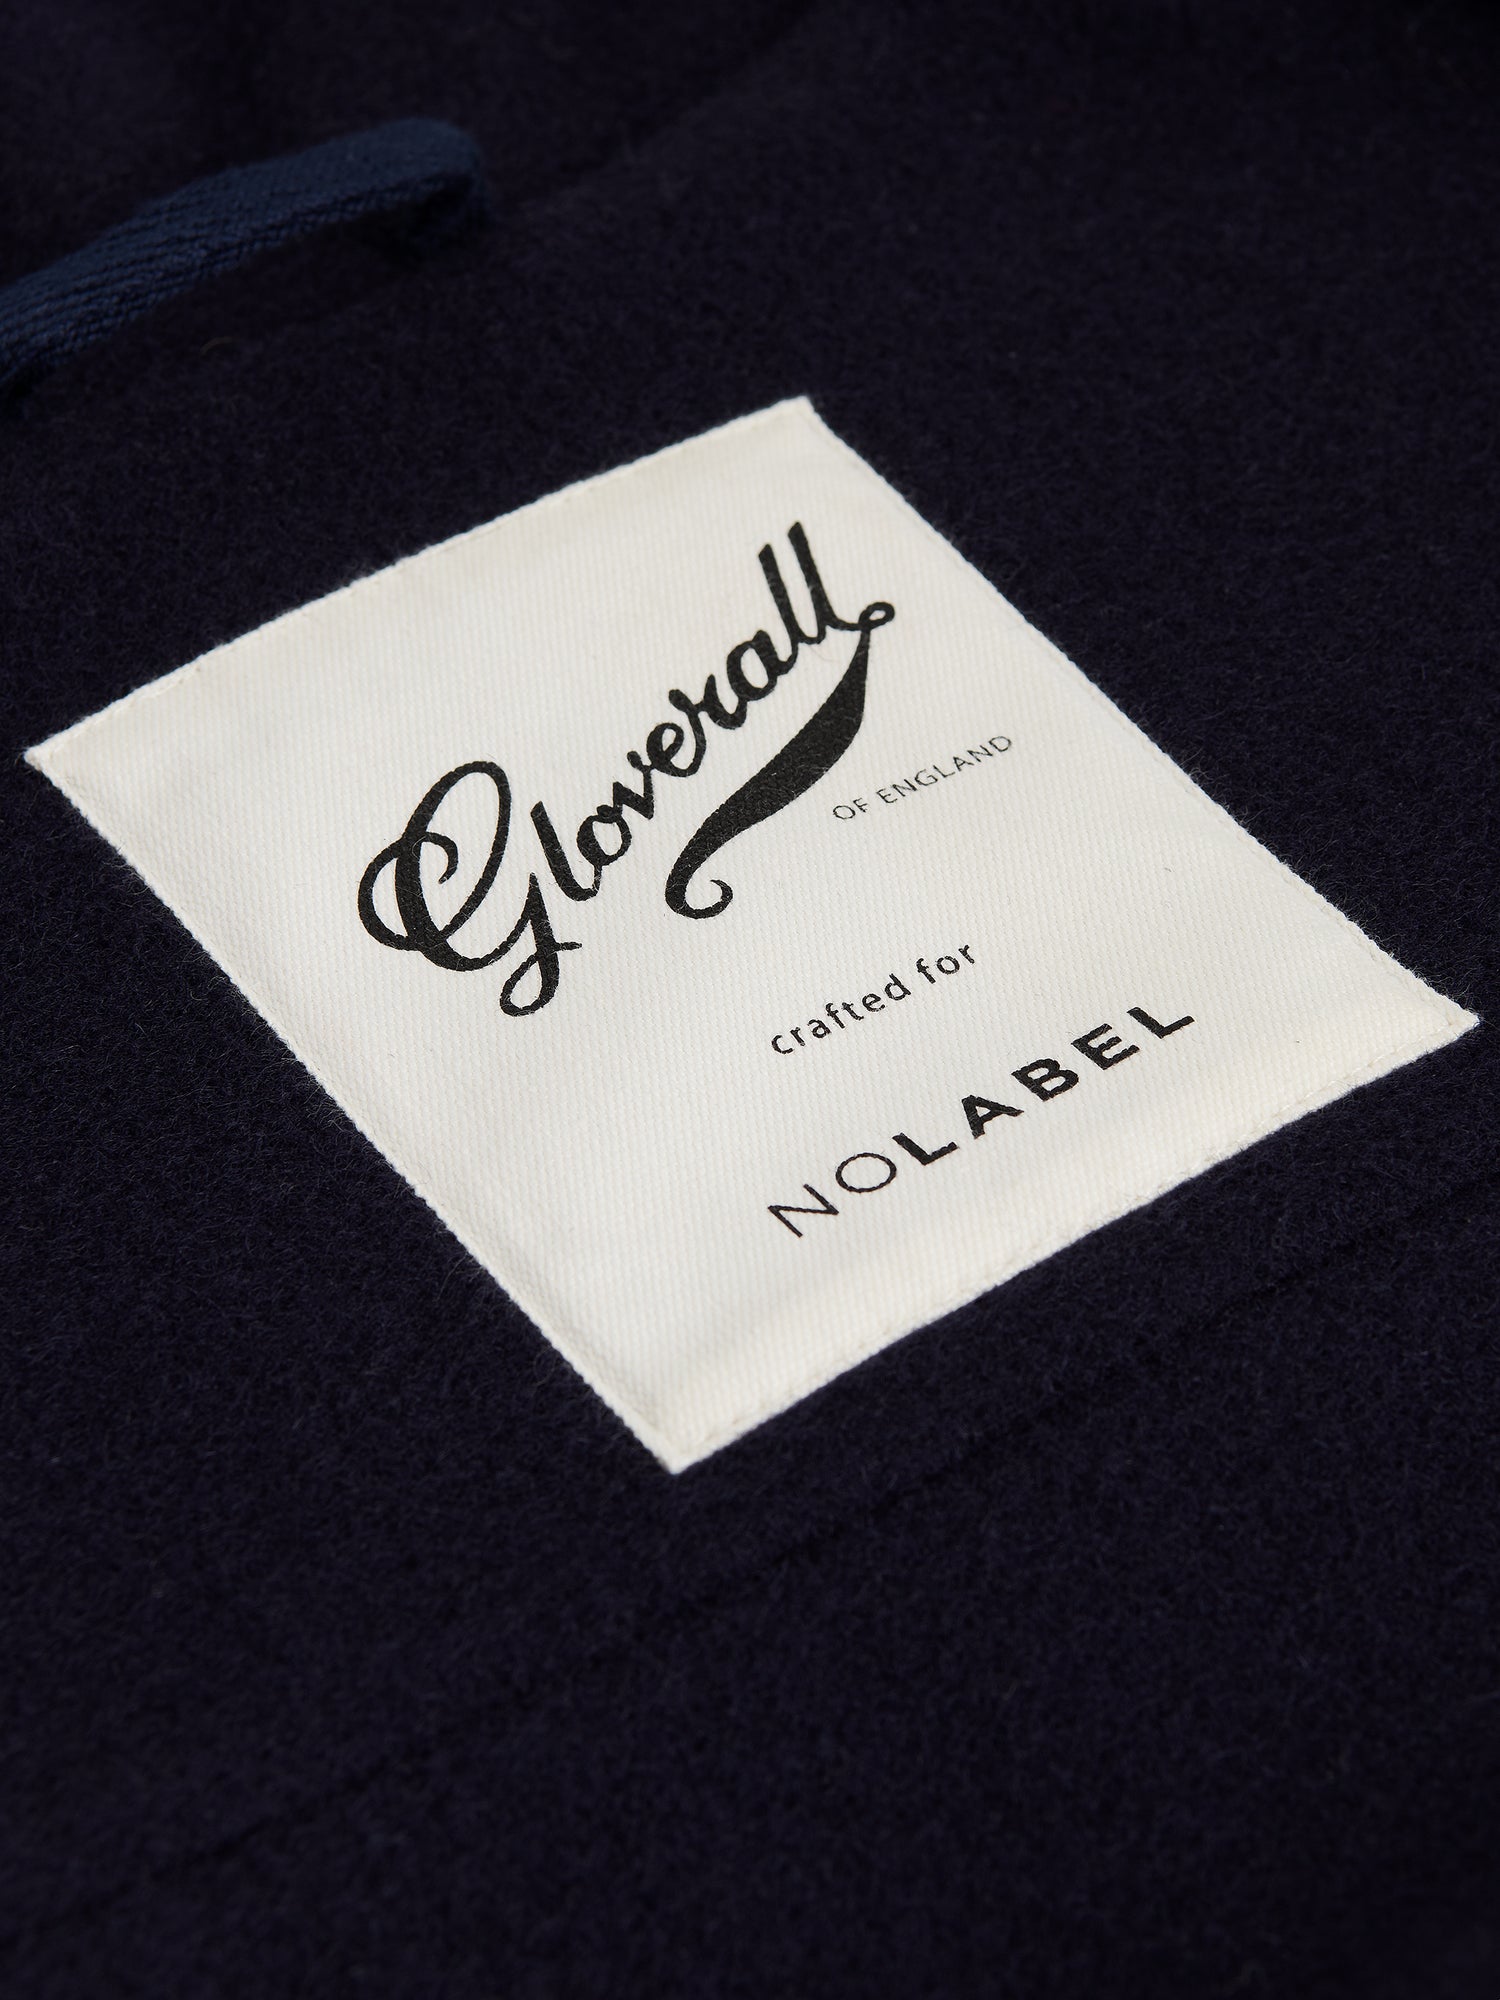 Gloverall x No Label Monty Coat Wool OW00042-NVY